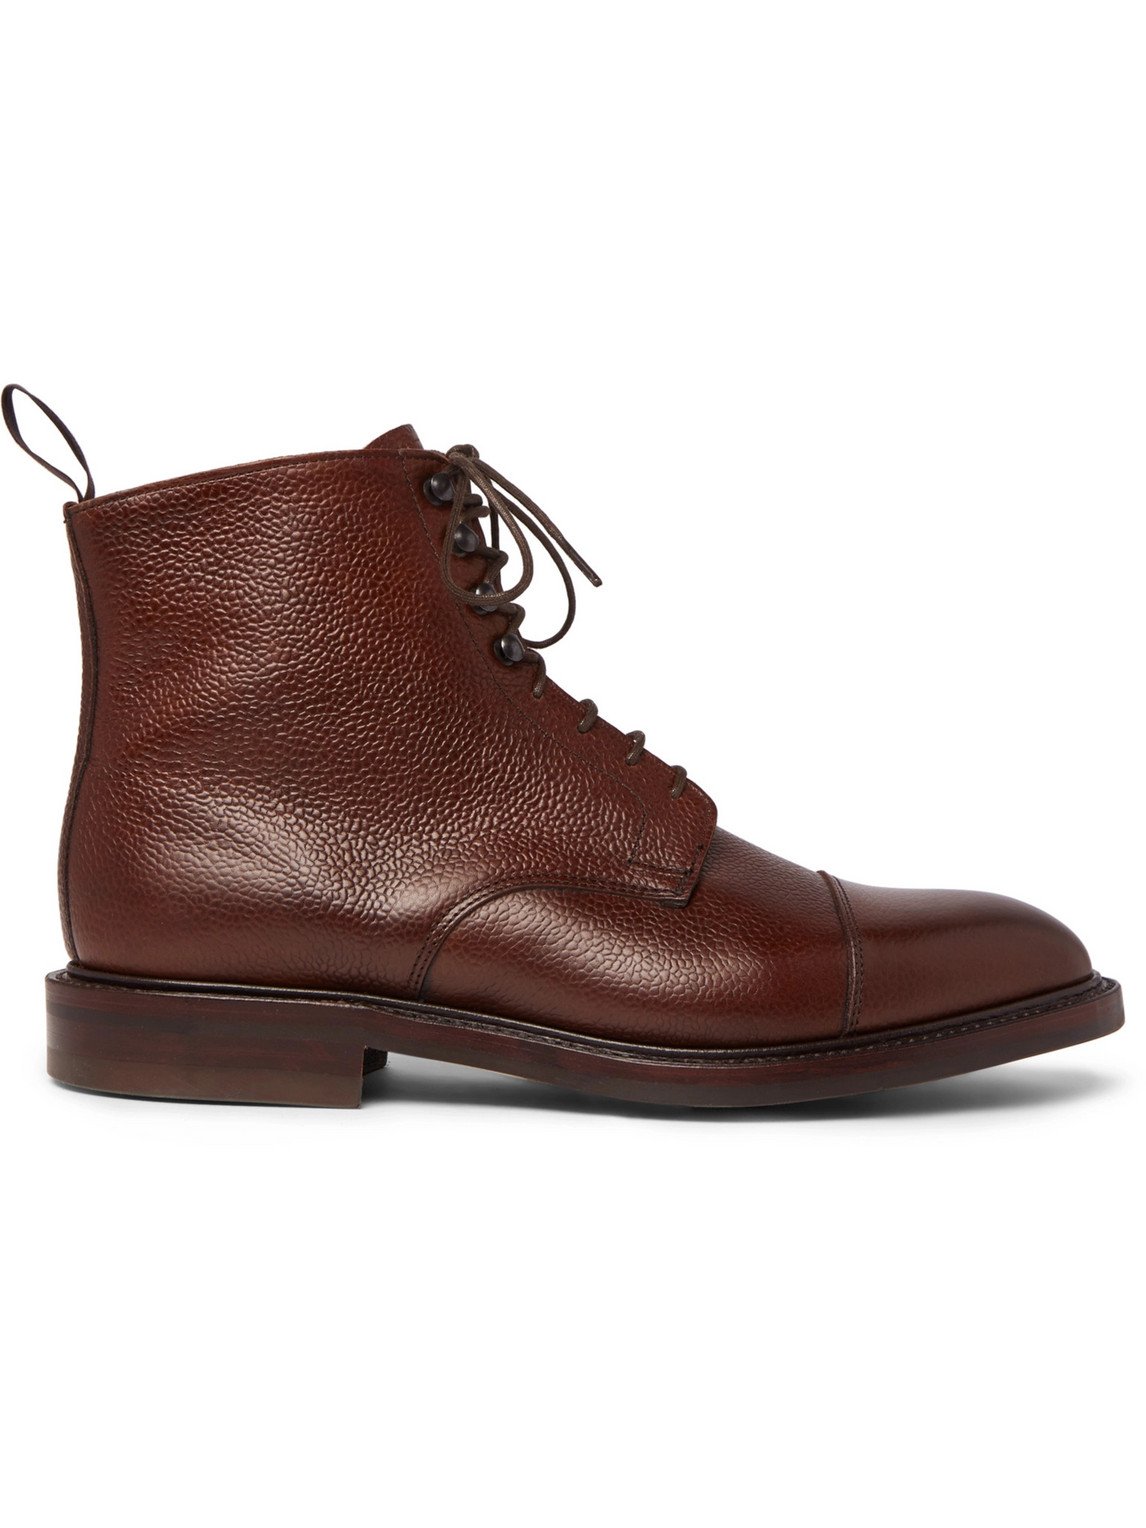 Kingsman George Cleverley Cap-toe Pebble-grain Leather Boots In Brown